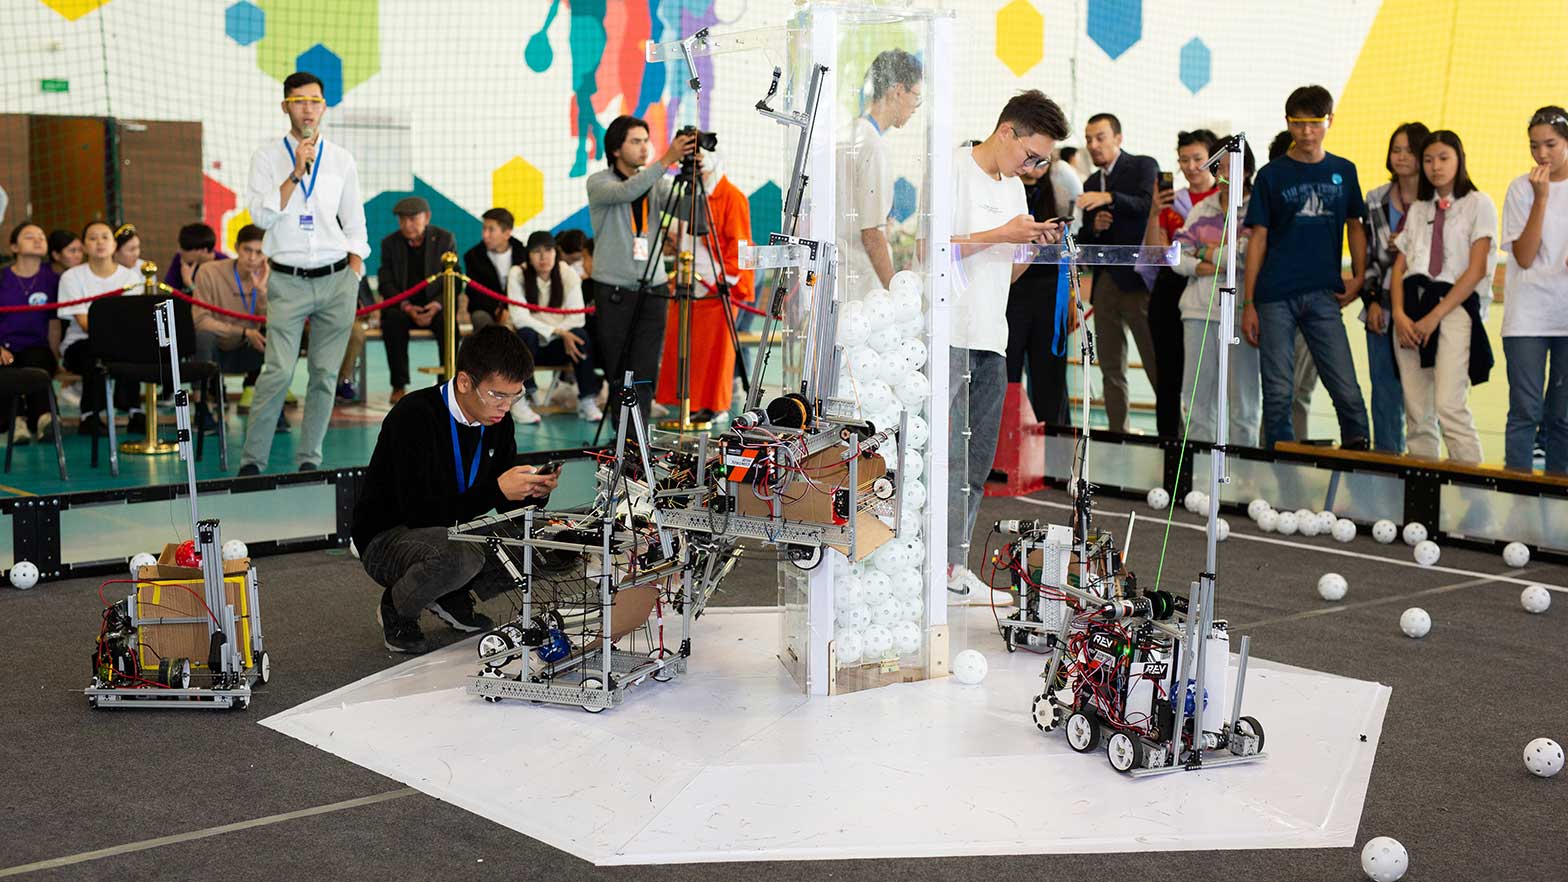 Mechanical robots being worked on by scientist